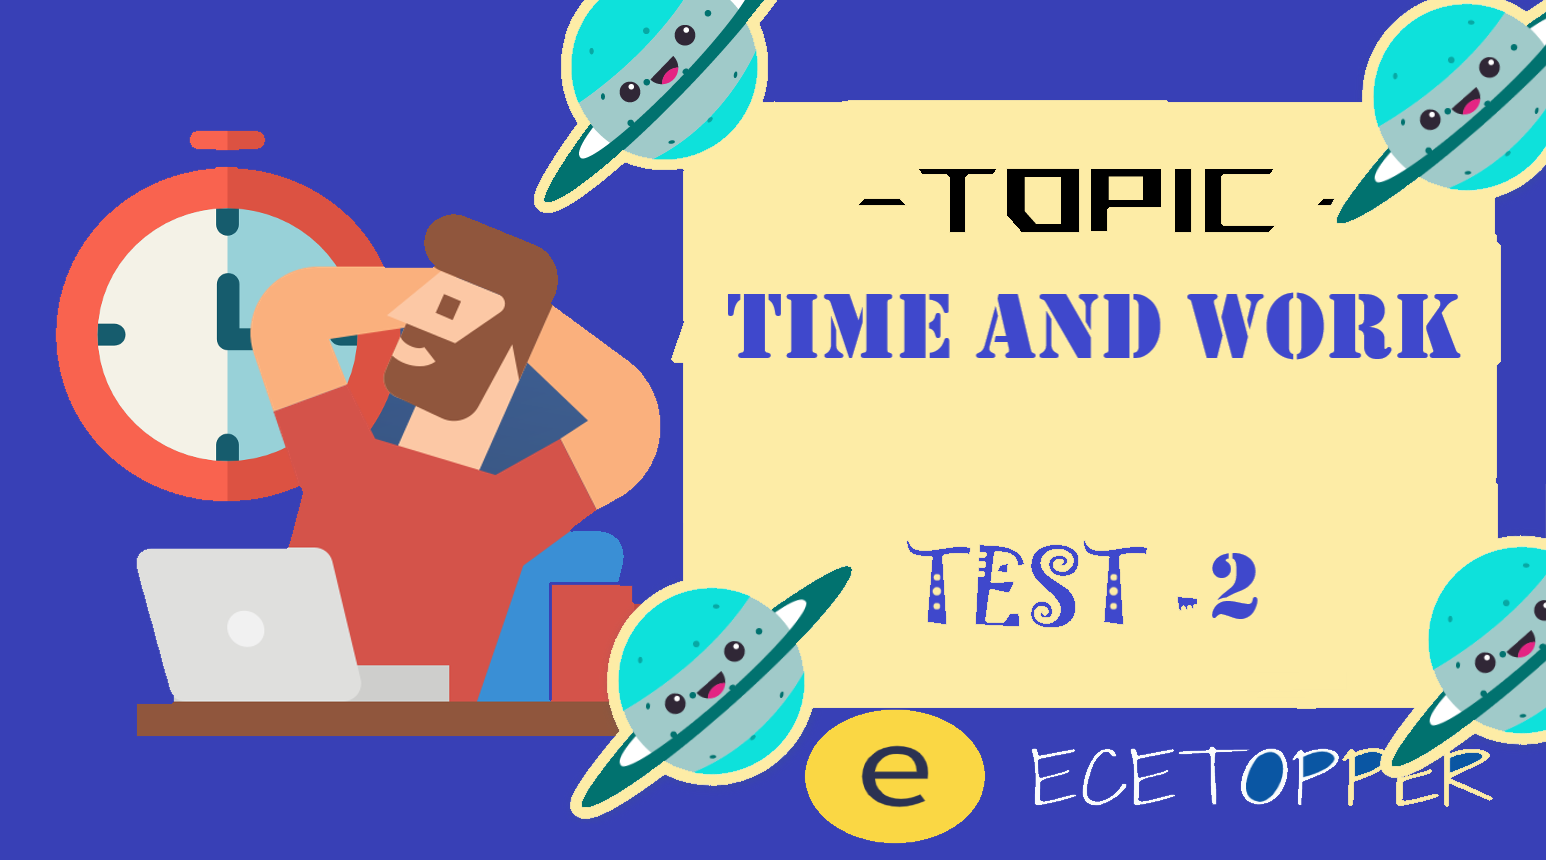 aptitude-mcq-test-with-solutions-and-explanations-topic-time-and-work-test-2